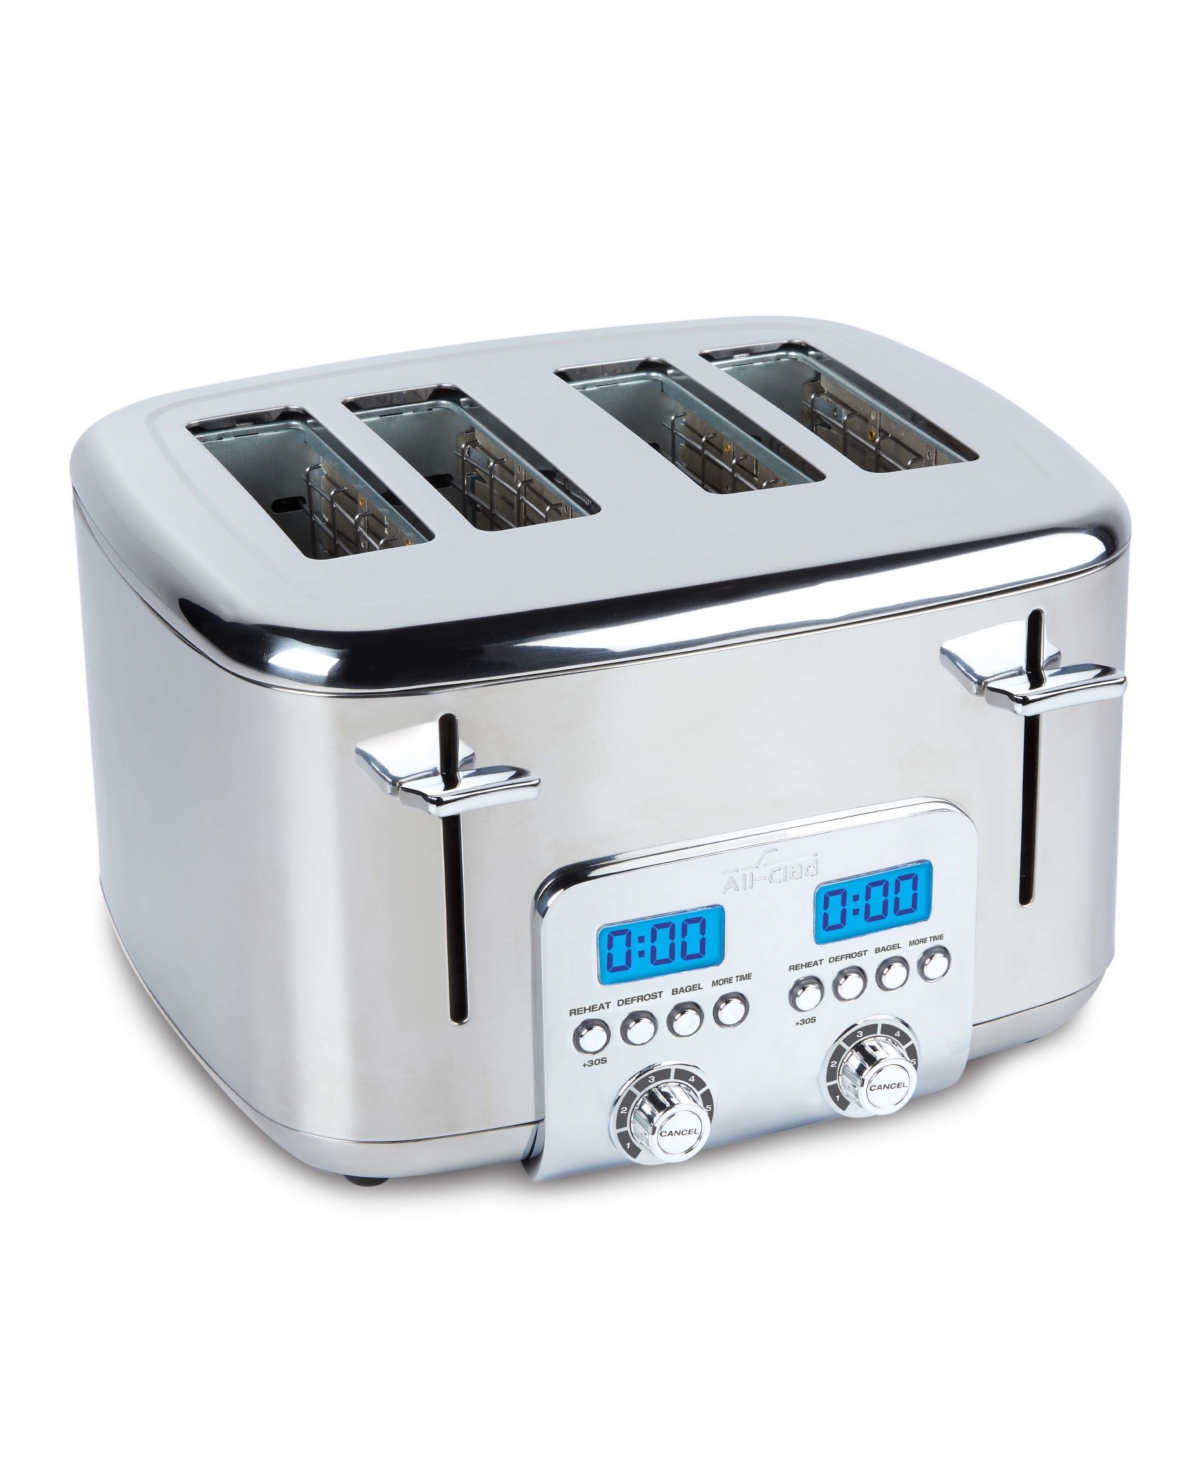 All-clad Digital Stainless Steel 8.9" Toaster, 4 Slice In Silver